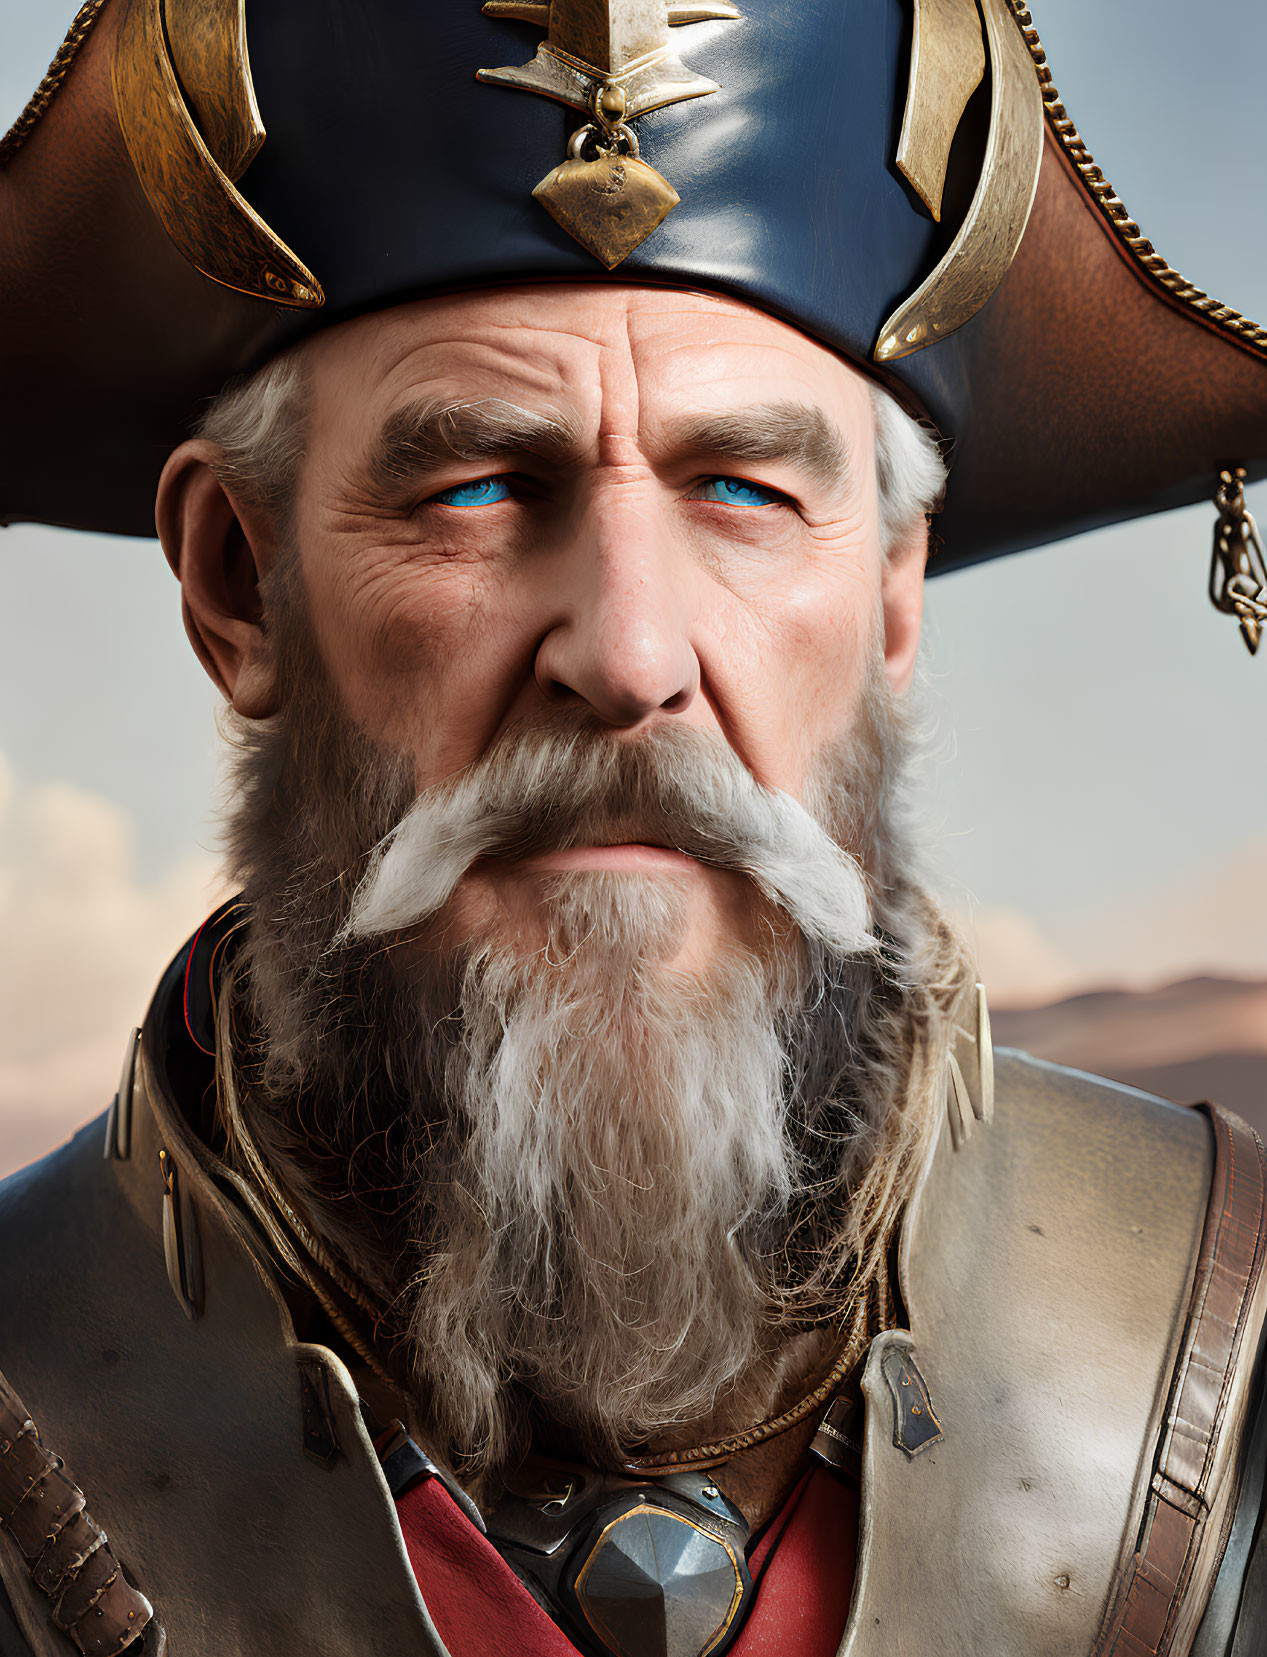 Digital artwork of older man as fantasy pirate with tricorne hat and gold accents.